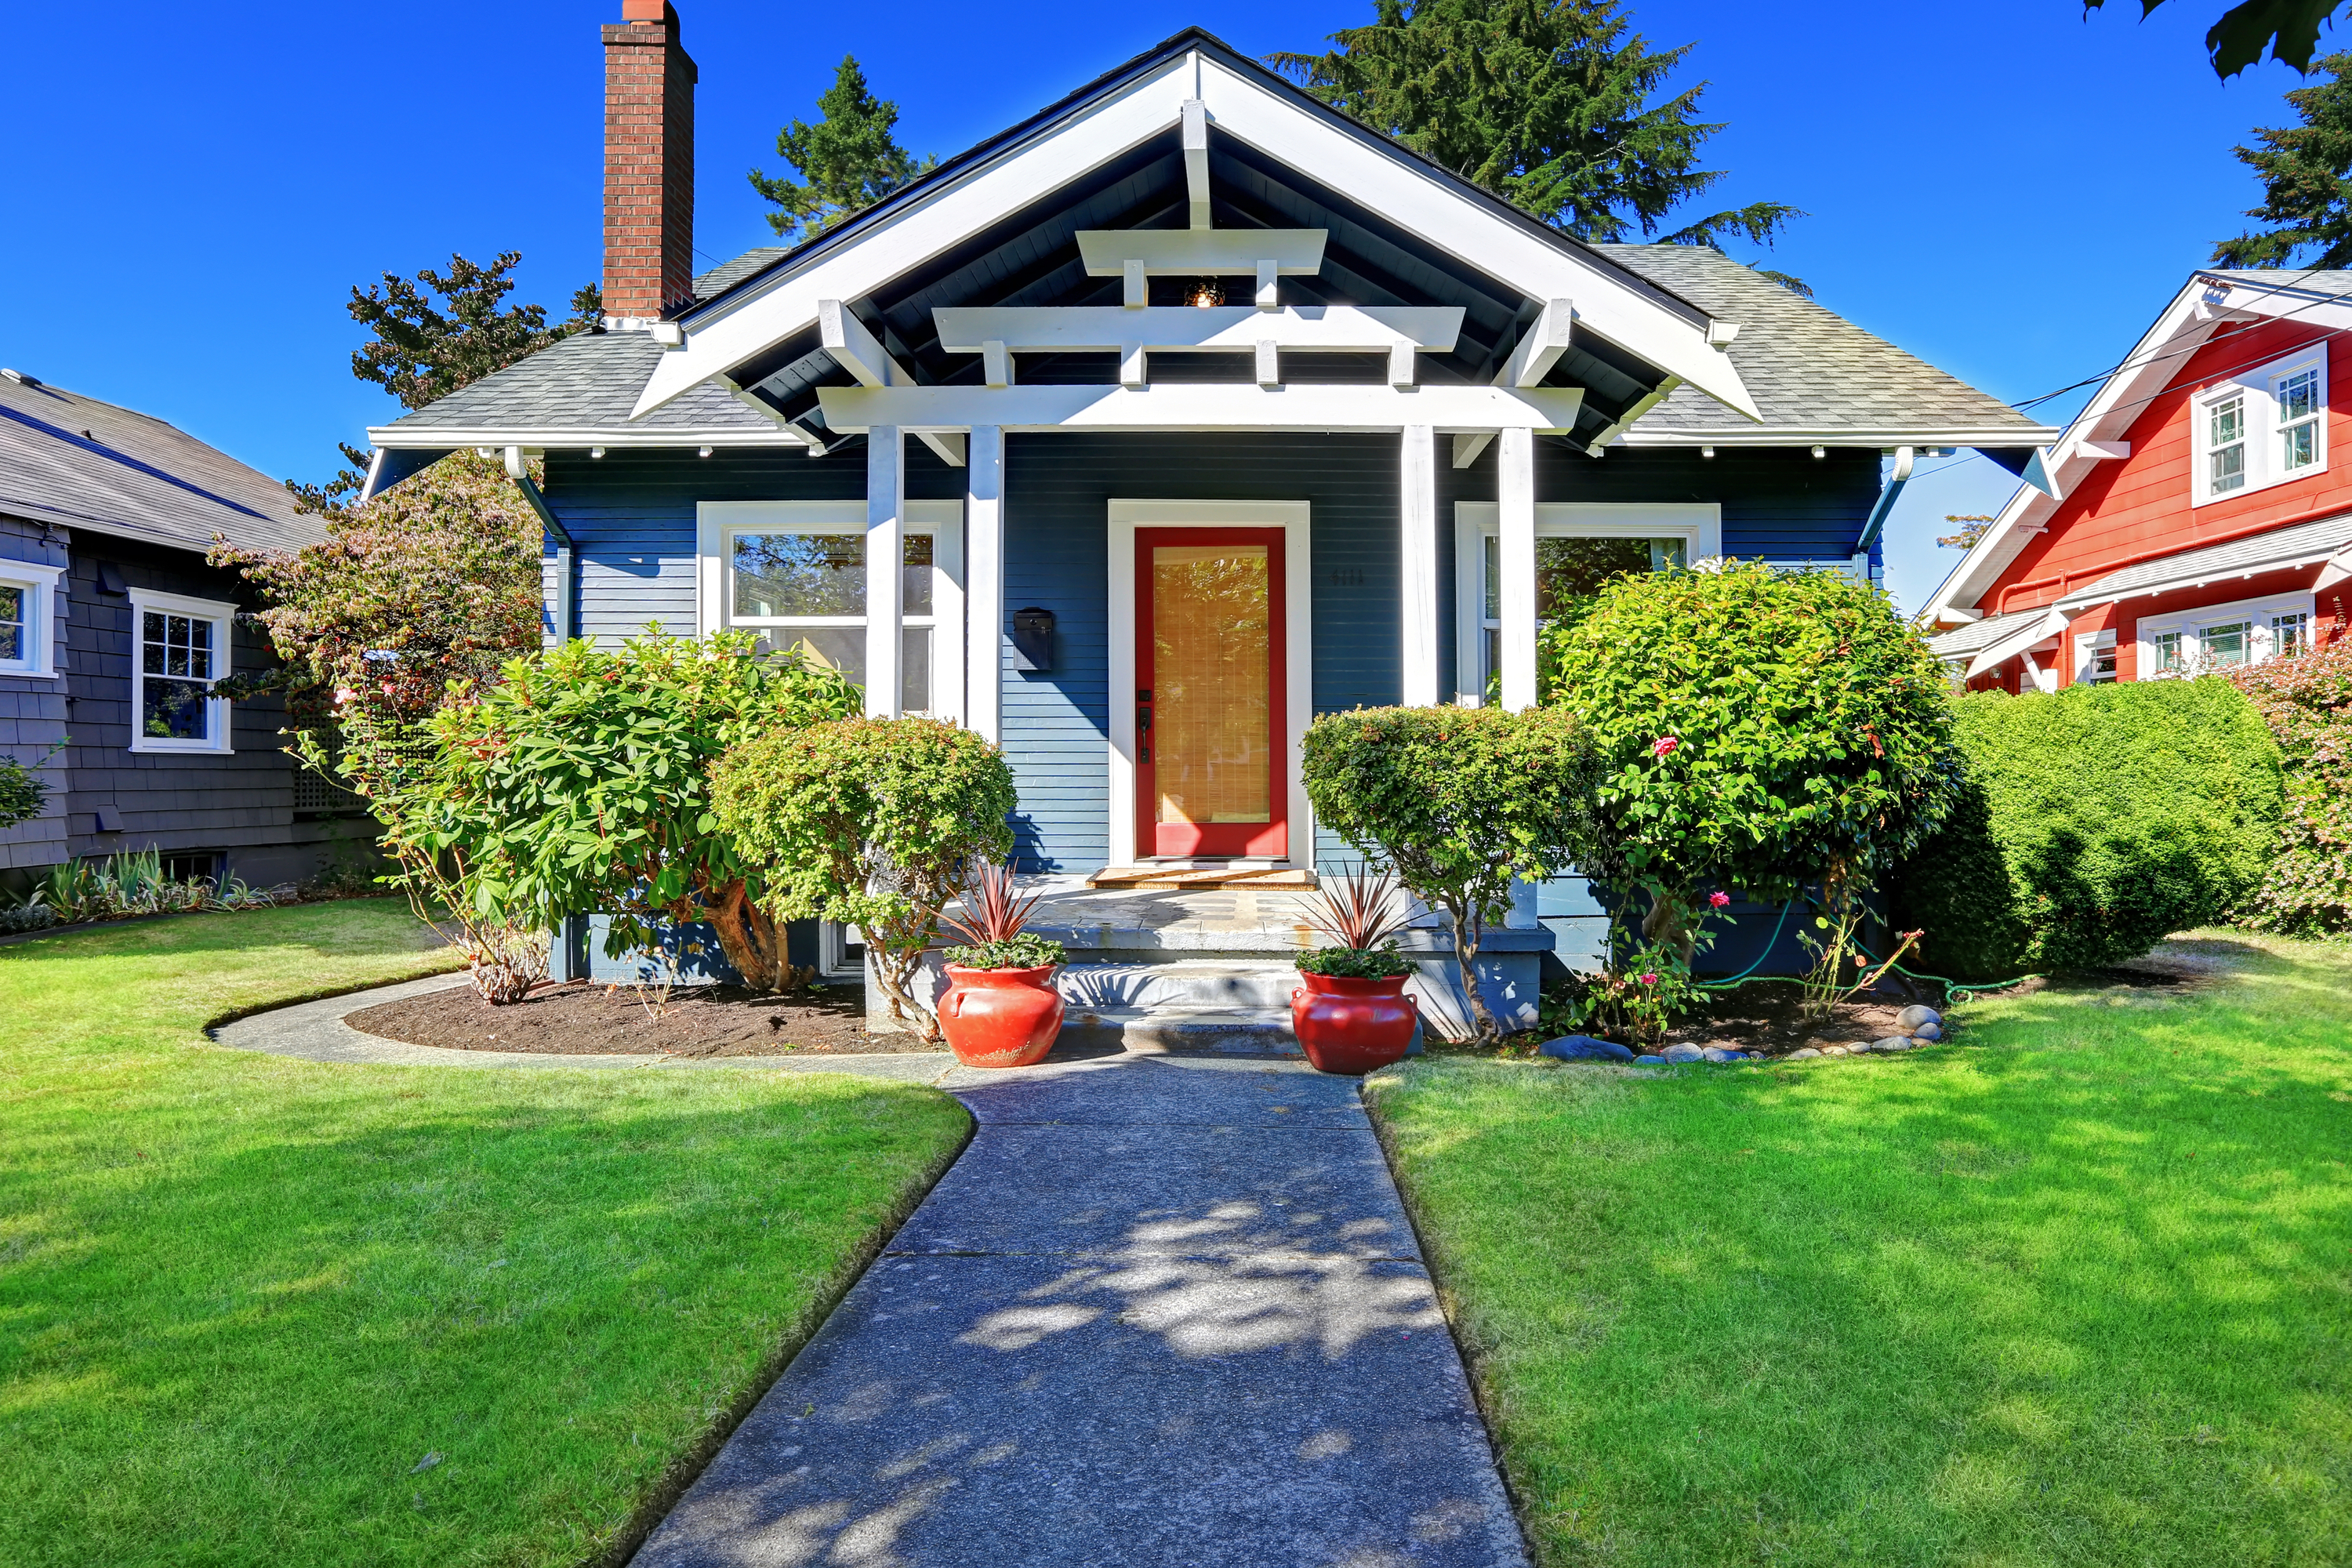 Cheap Home Exterior Ideas For Expensive Looking Curb Appeal